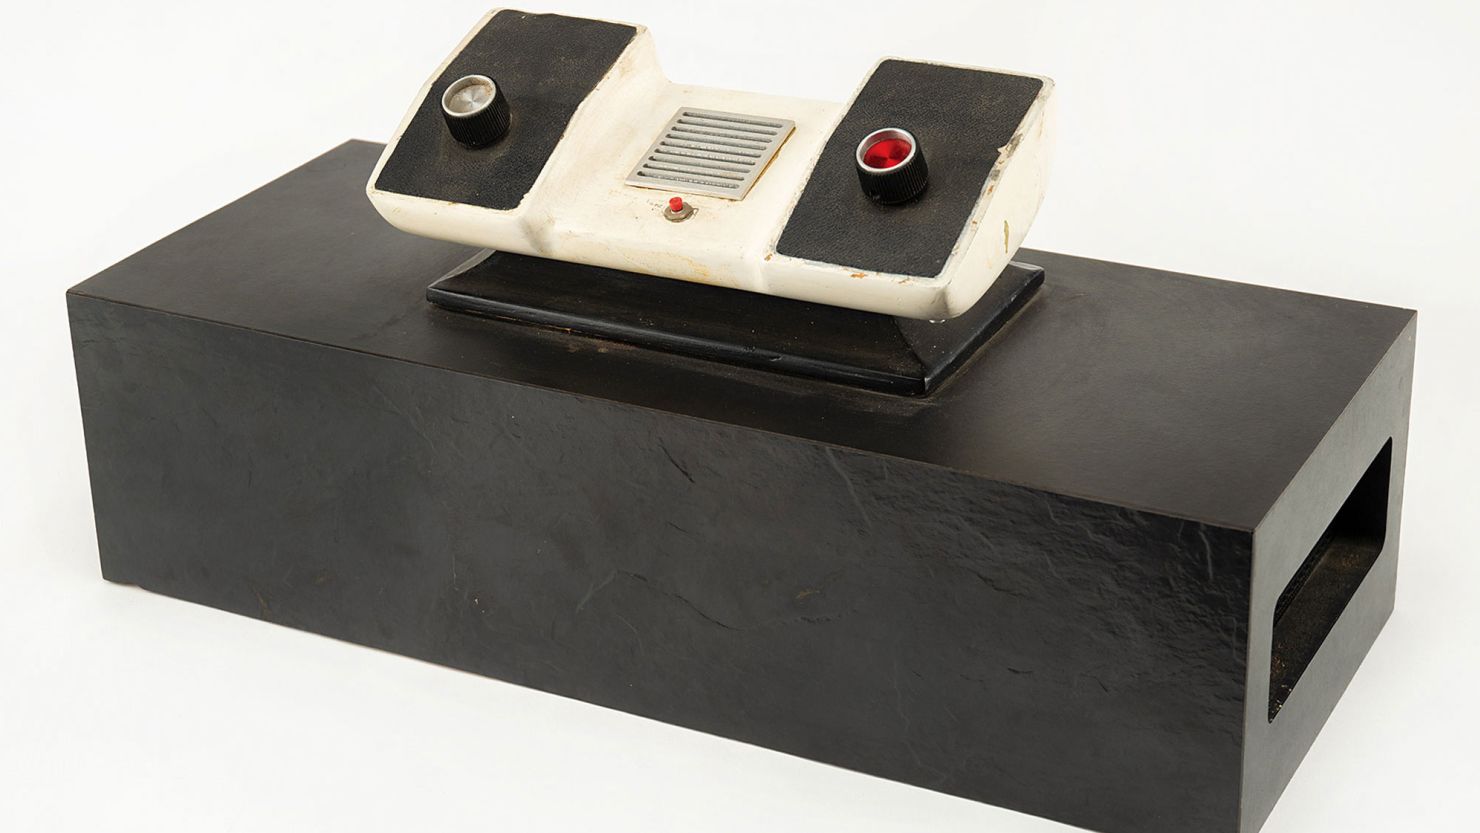 The original 1975 mock-up of the Pong home system sold for $270,910 at auction.